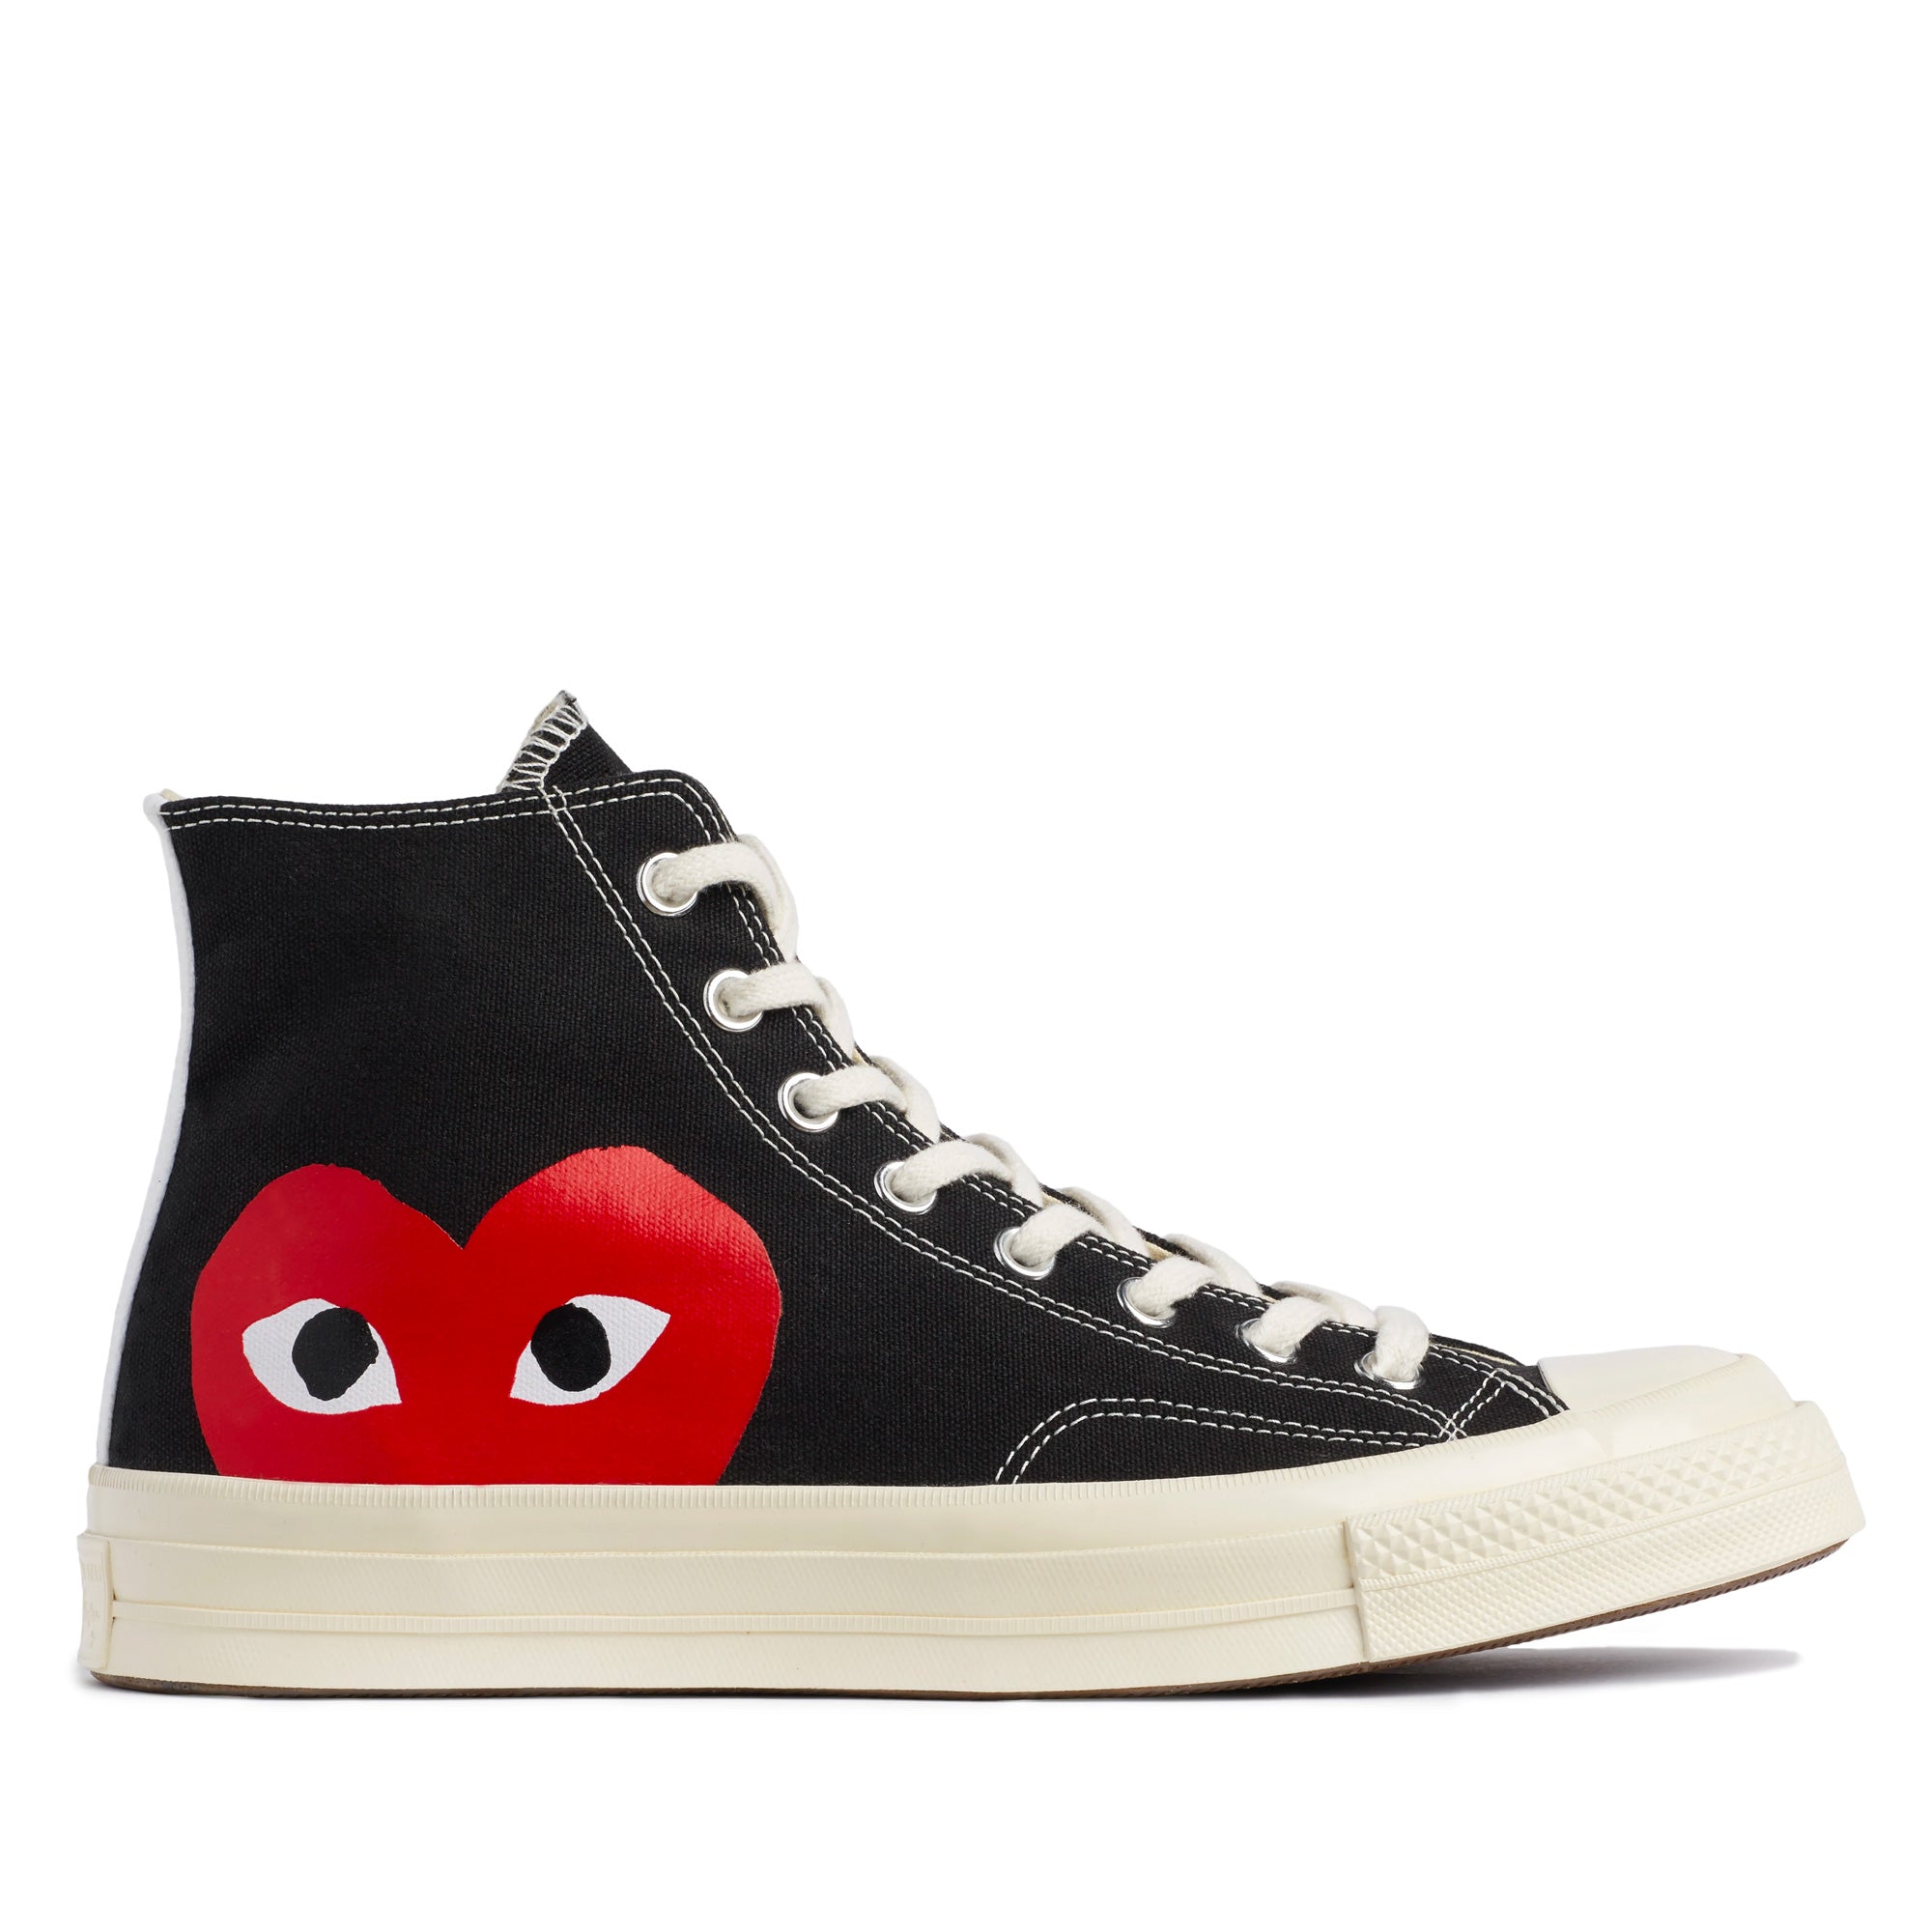 Play Converse - Red Heart Chuck Taylor All Star ’70 High Sneakers - (Black) view 1